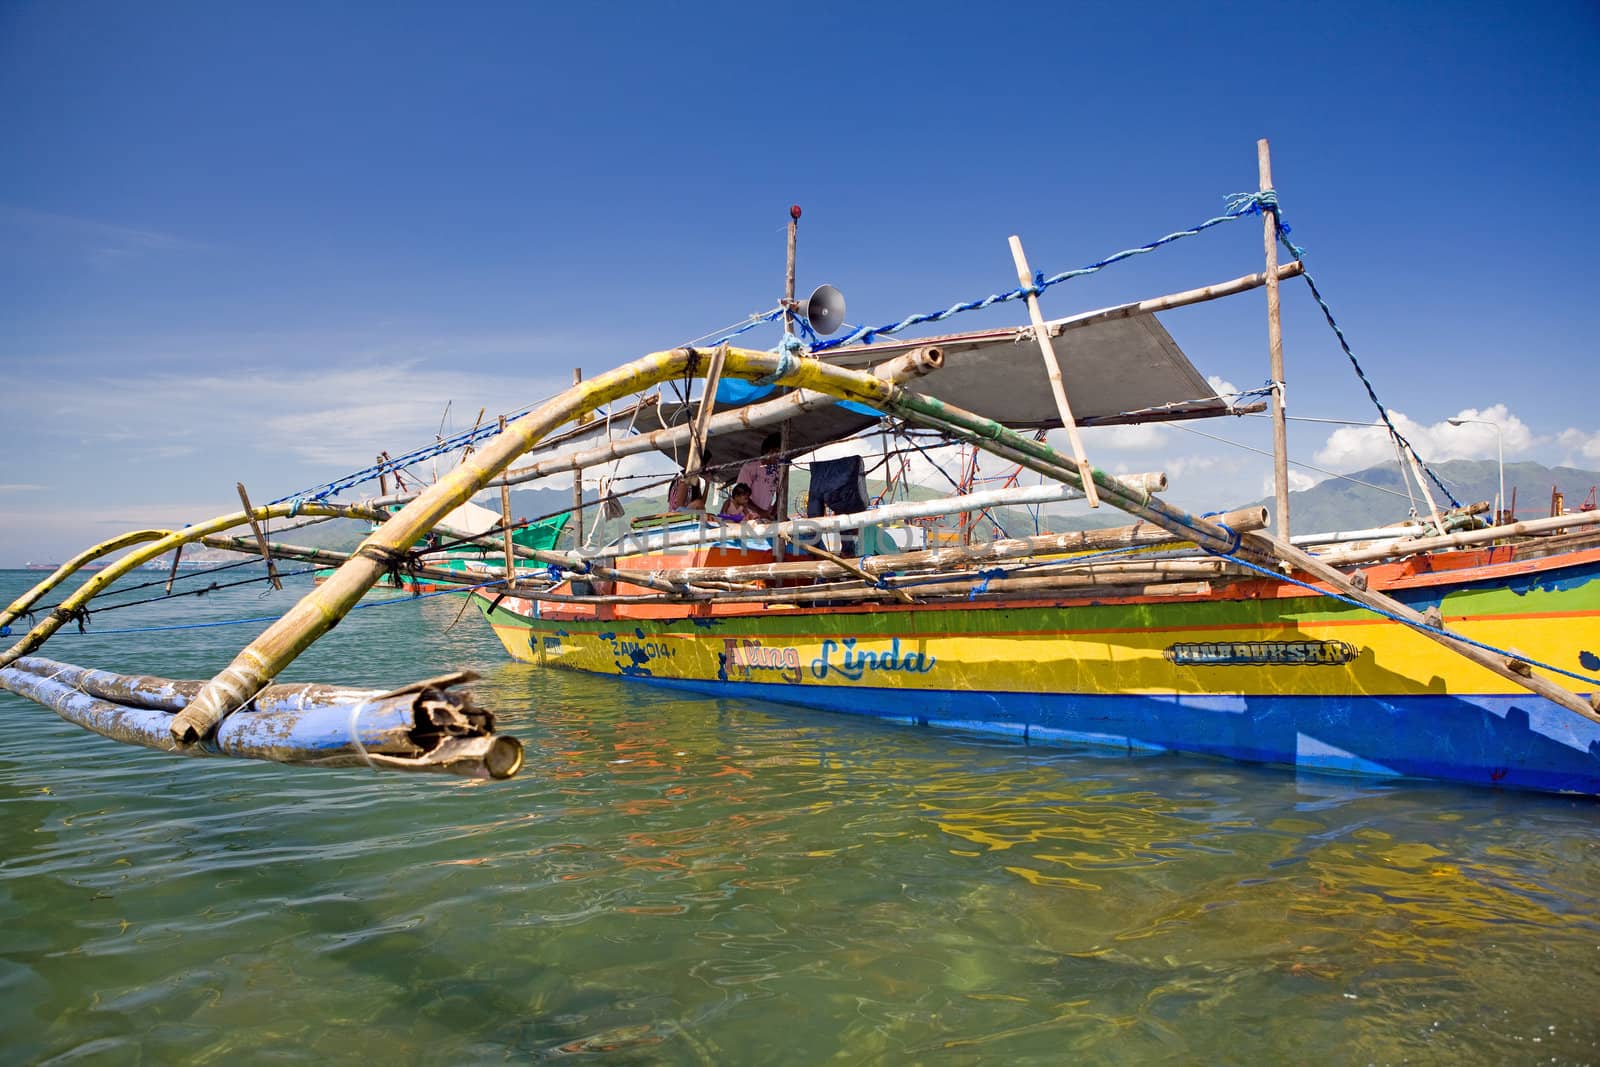 Filipino fishing family living onboard their outrigger canoe also called a pump boat and locally known as a bangka. Subic Town, Olongapo, Philippine Islands.